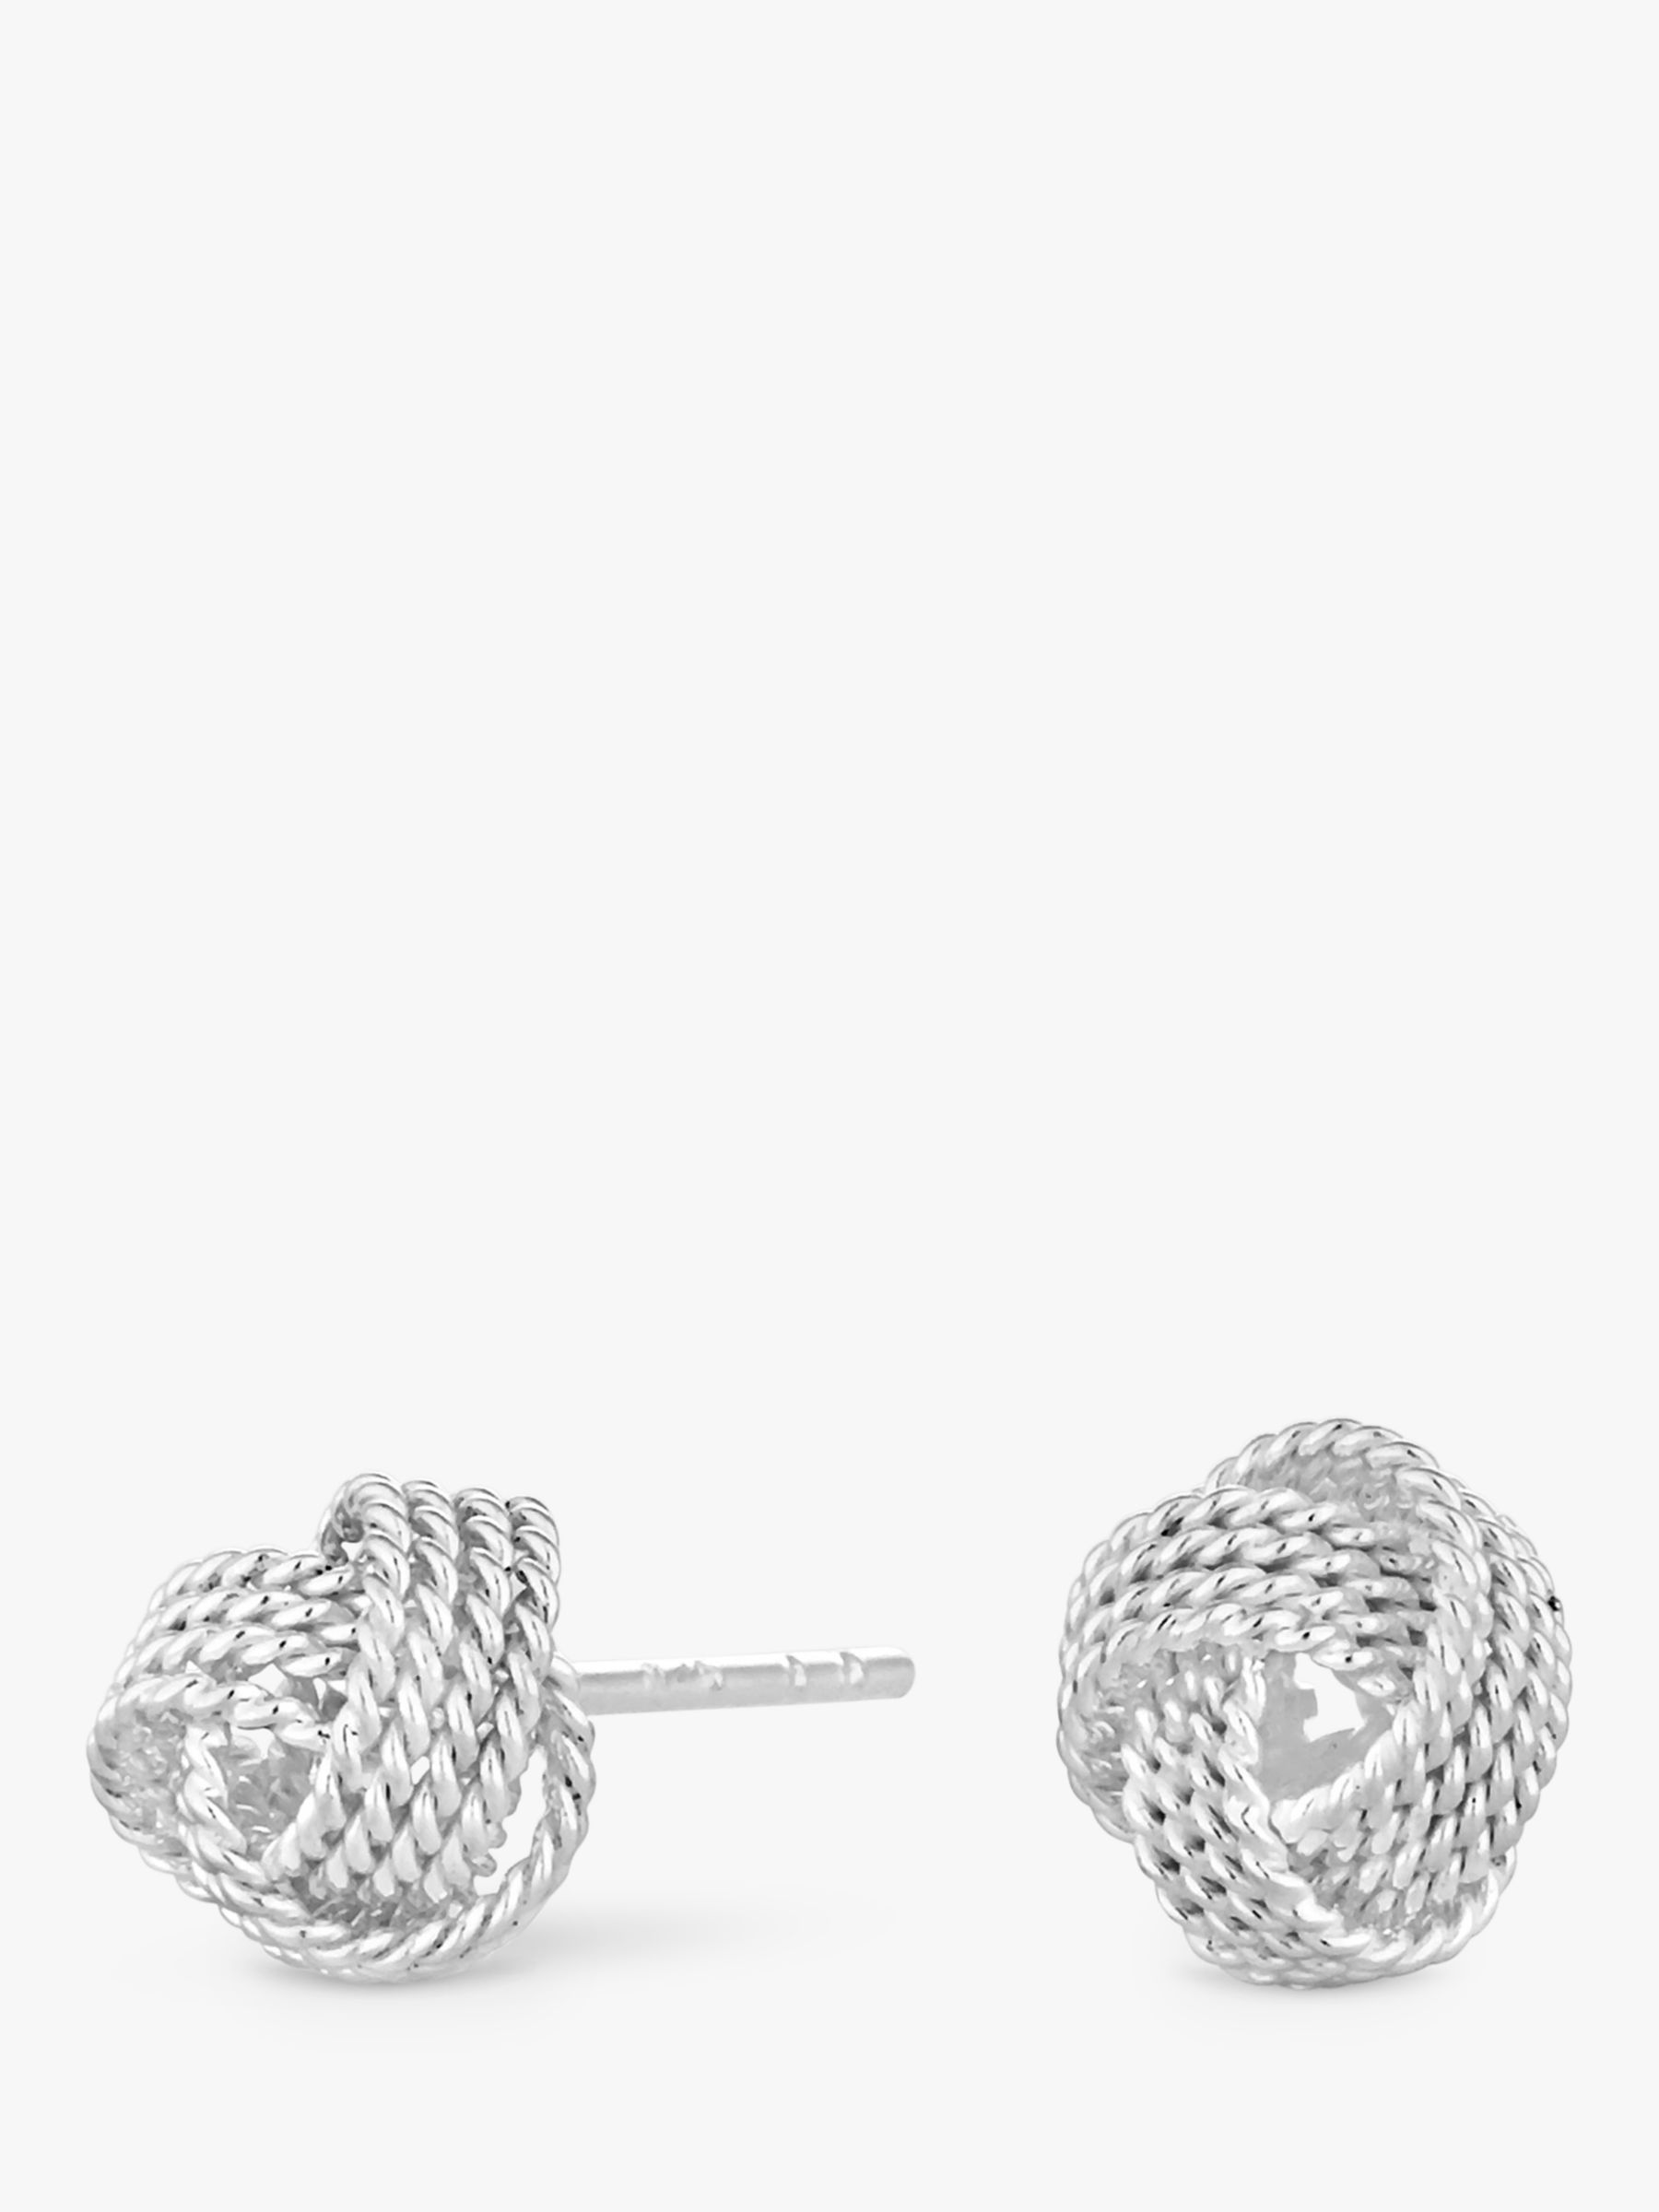 Silver Knotted rope stud earrings